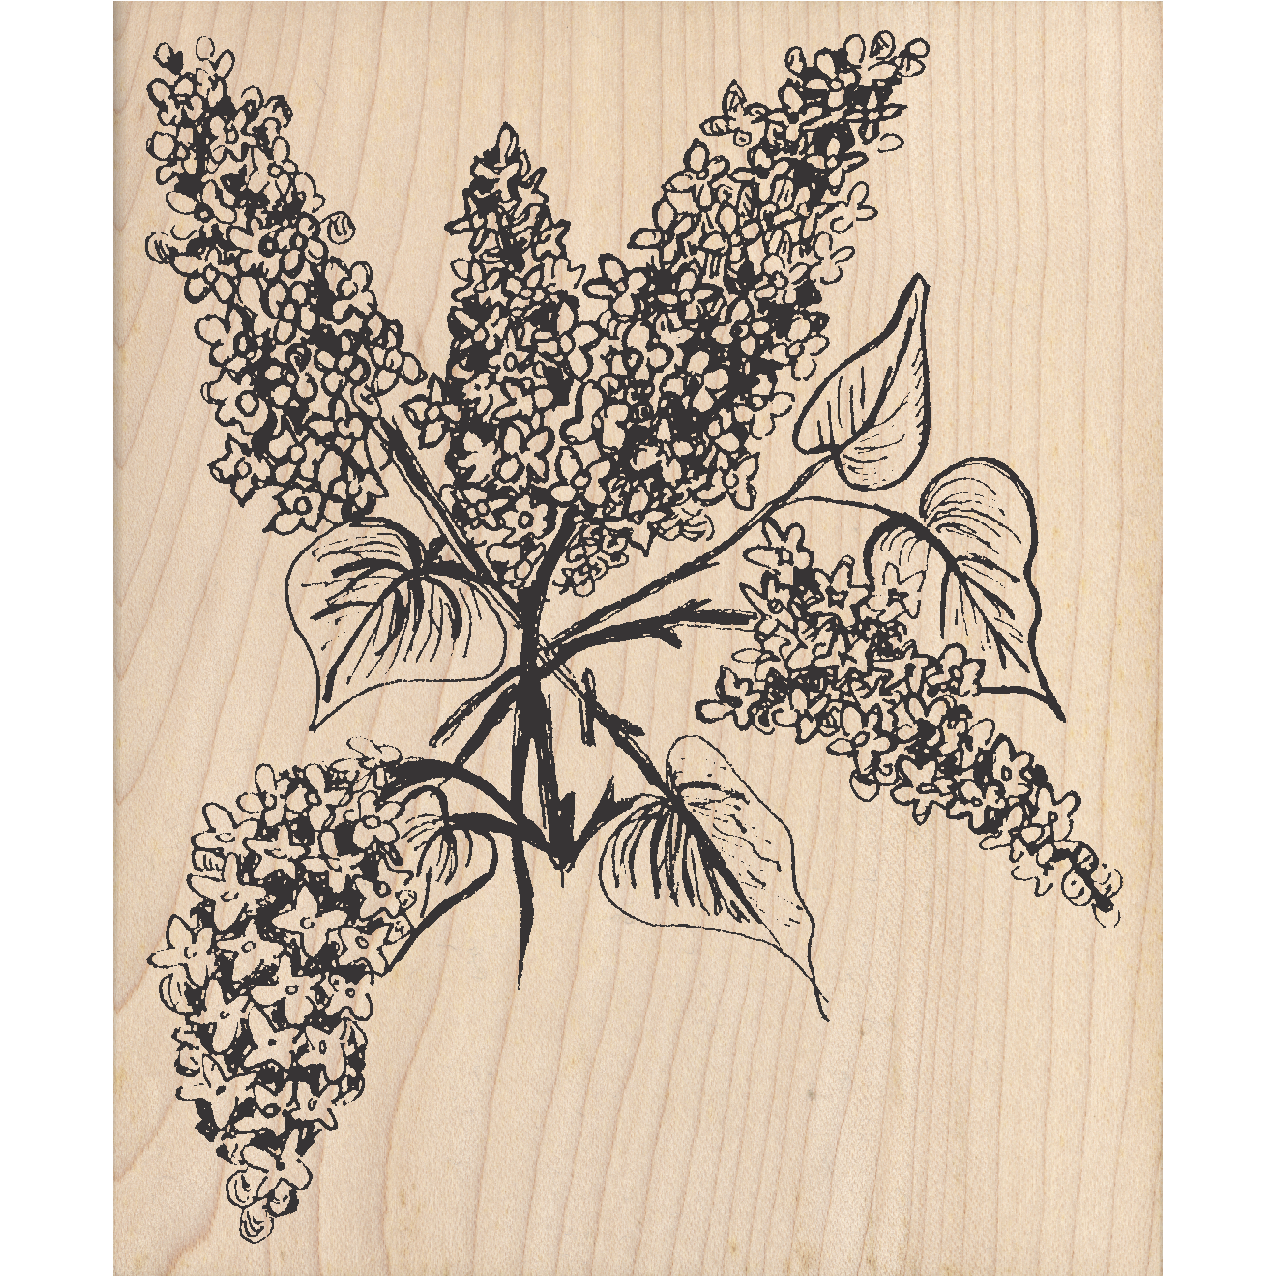 Lilac Rubber Stamp 3.5" x 4.25" block